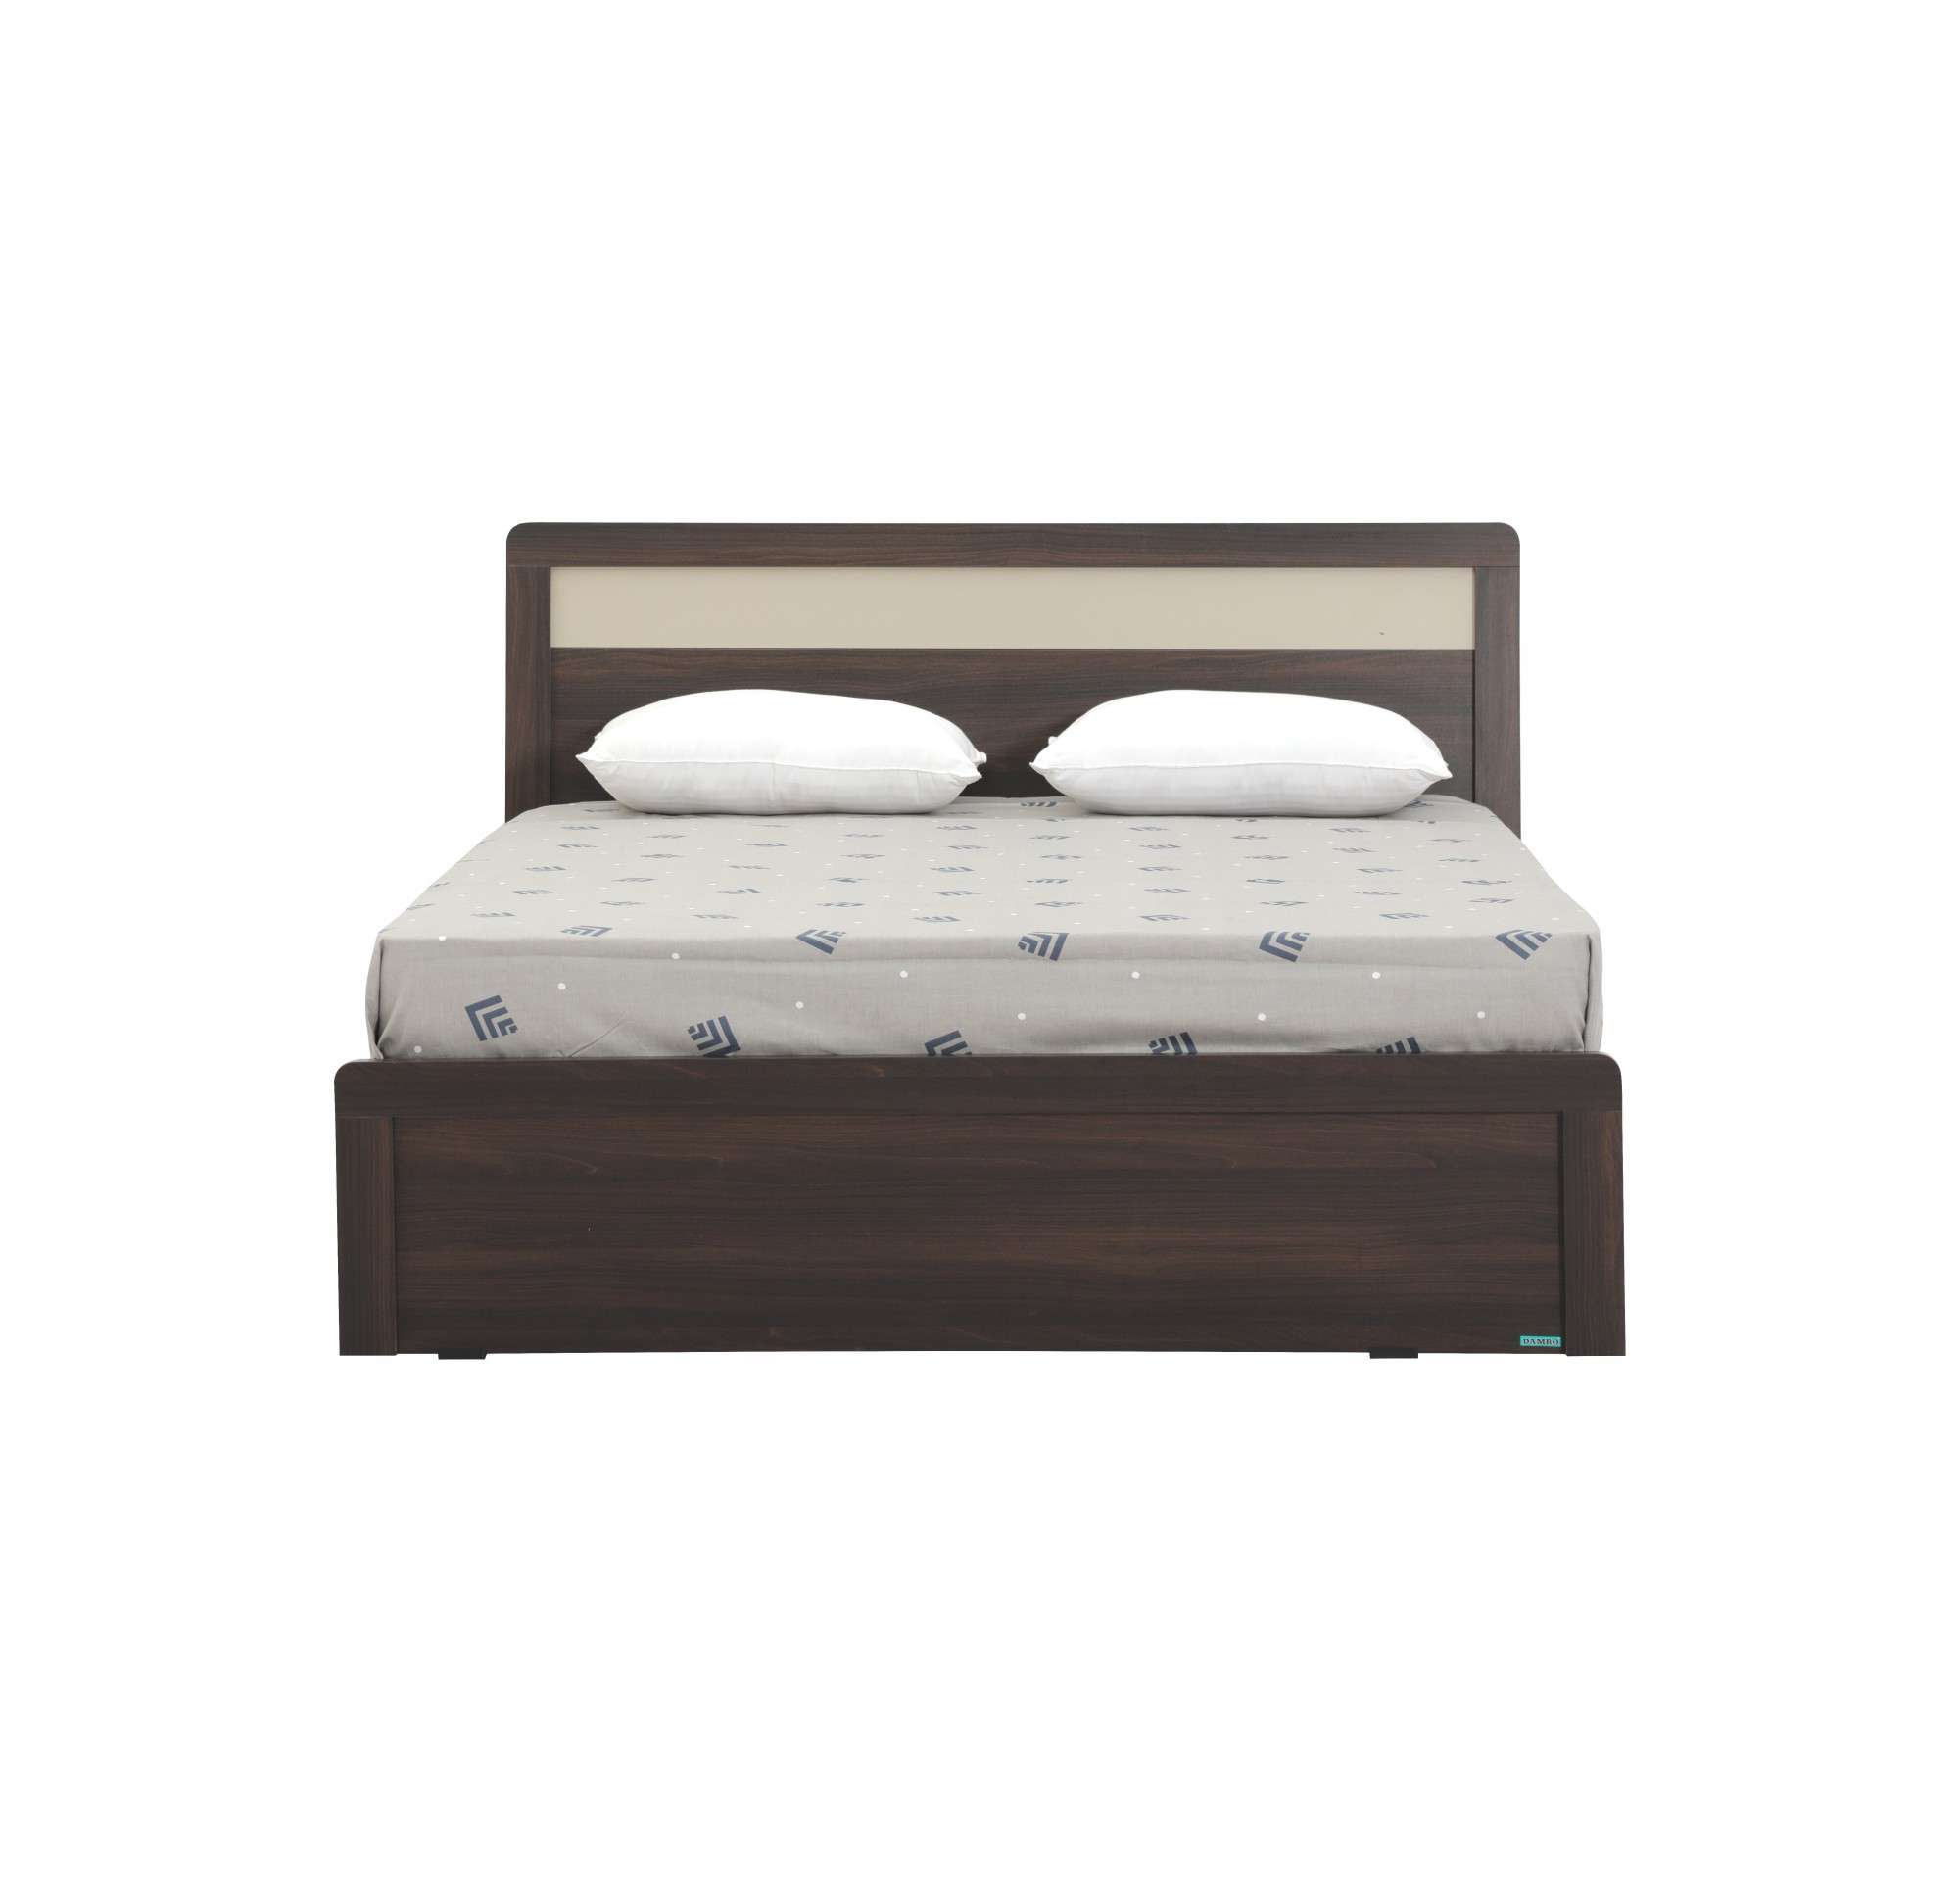 KBS035-KD Bed With Storage-M42/M50